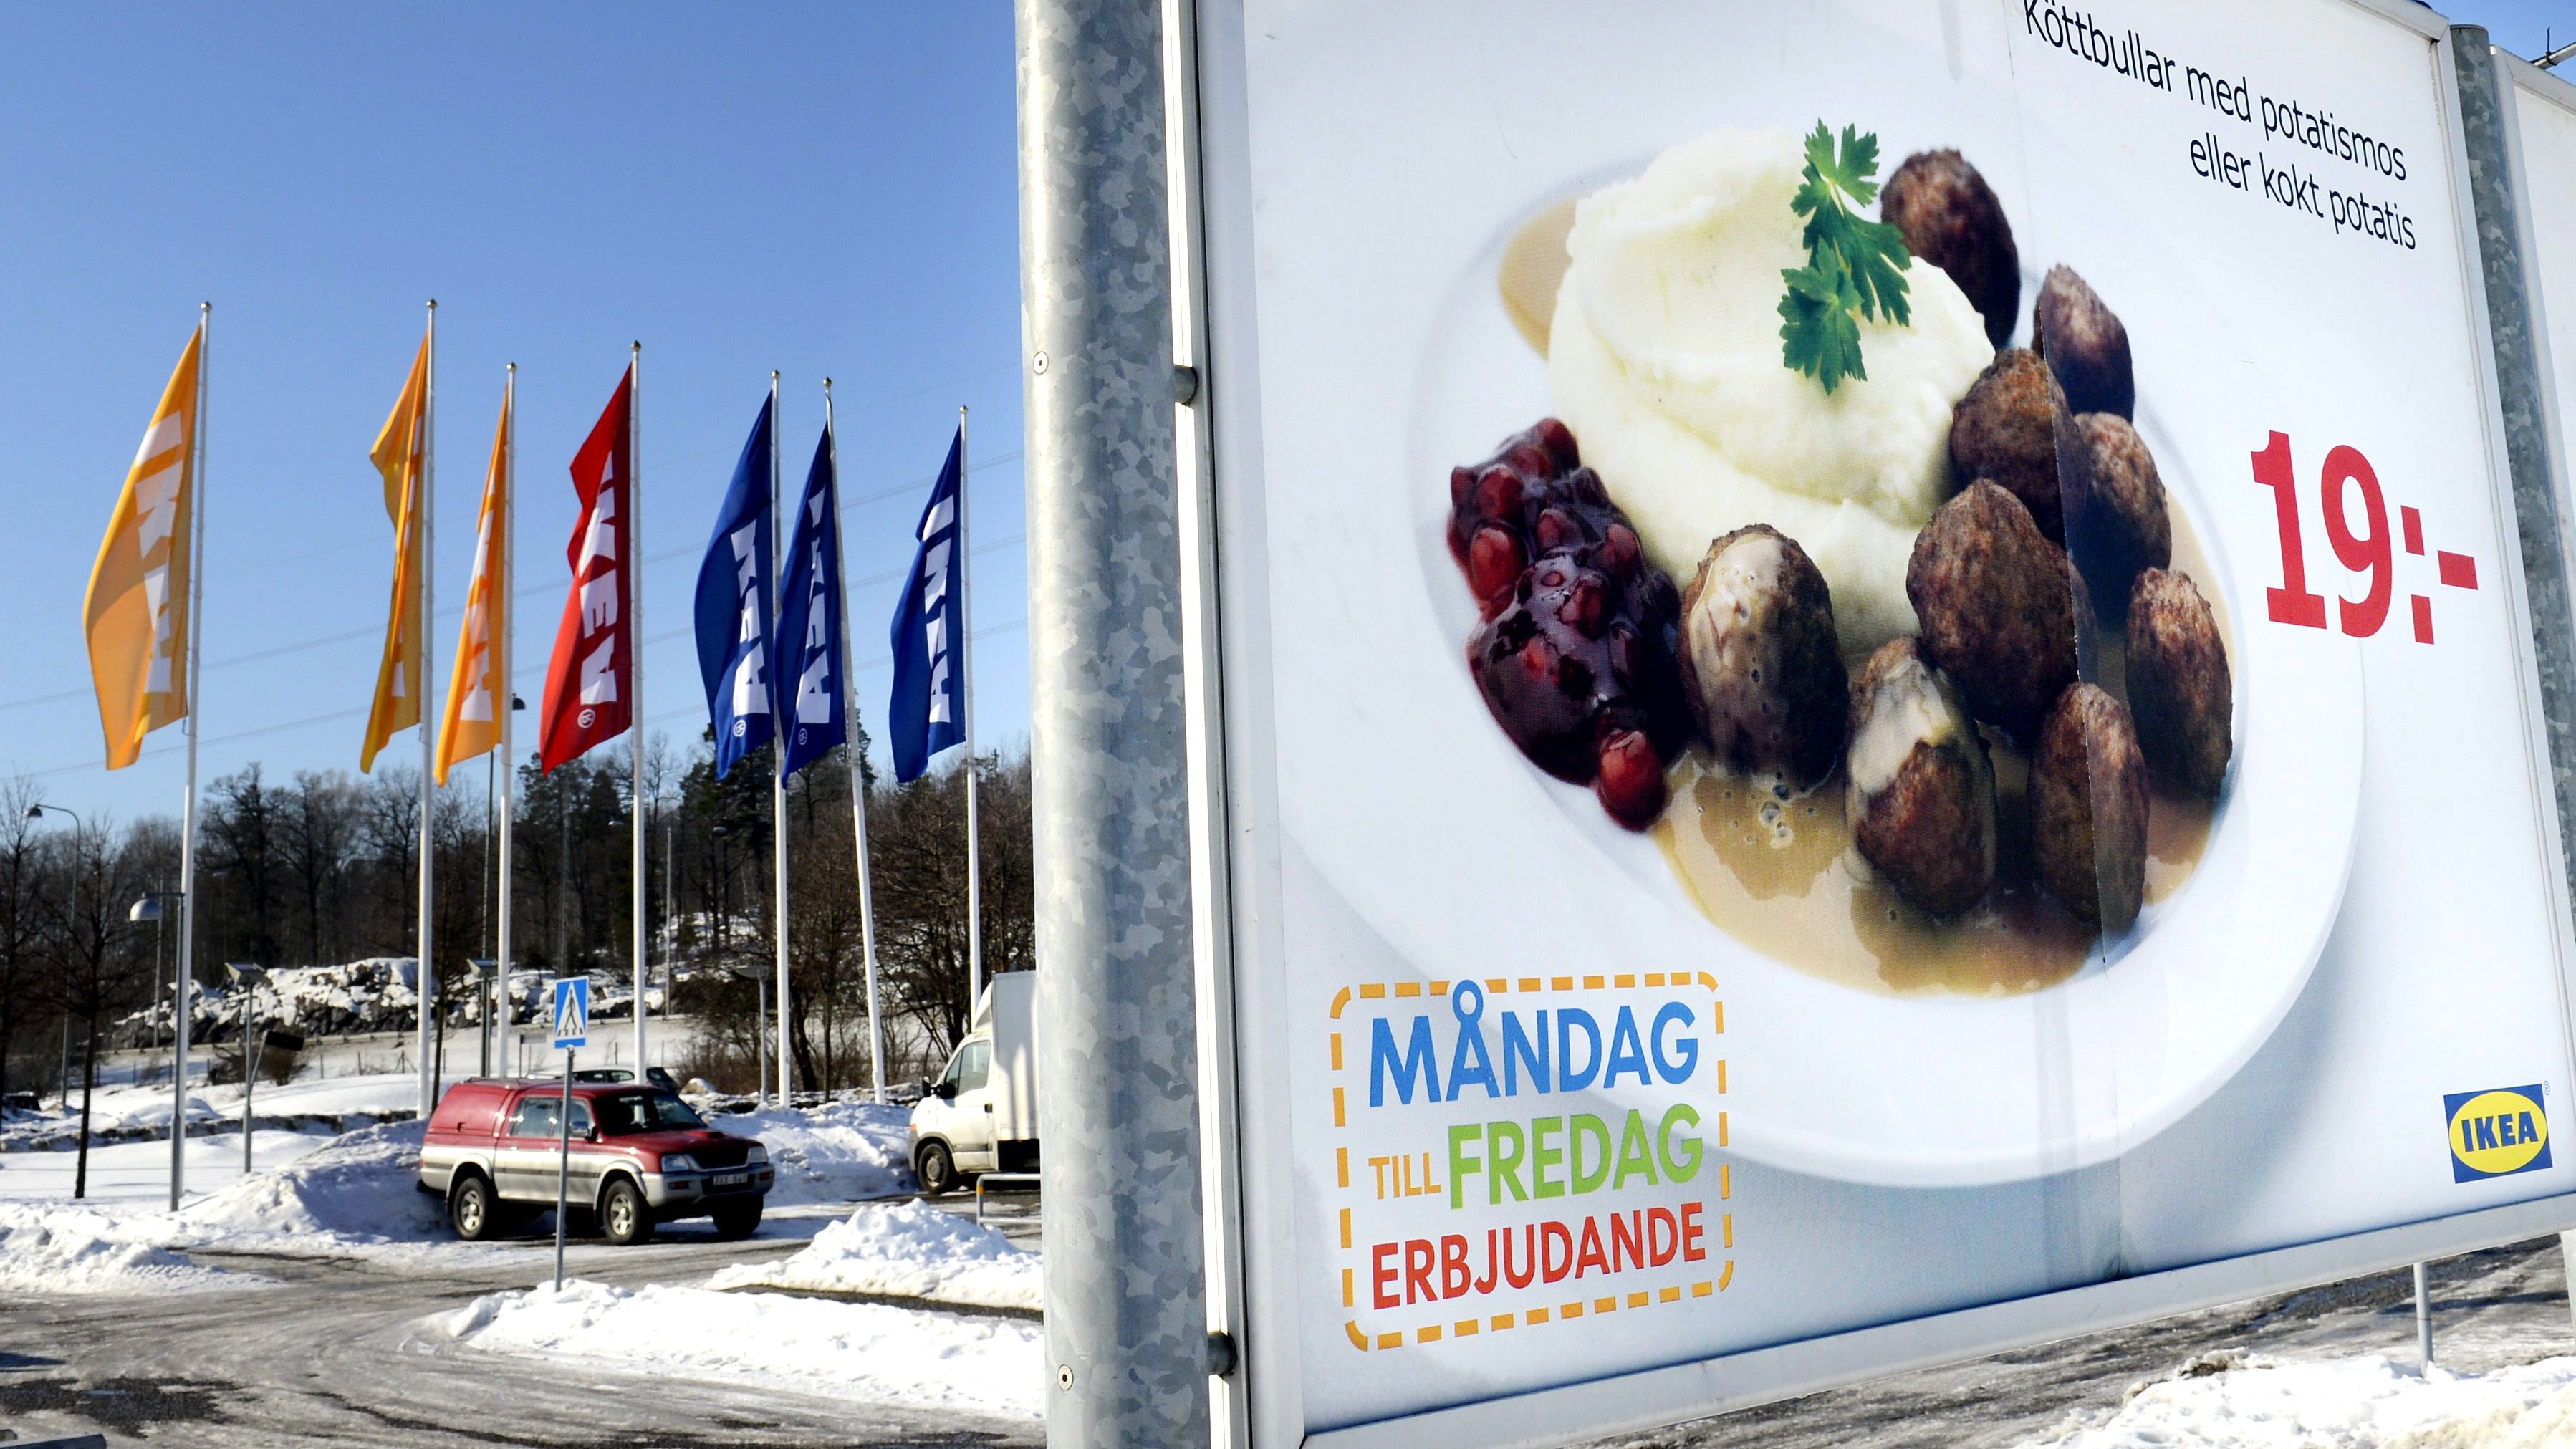 Swedish meatballs are available in IKEA superstores around the world -- one reason for their global fame.